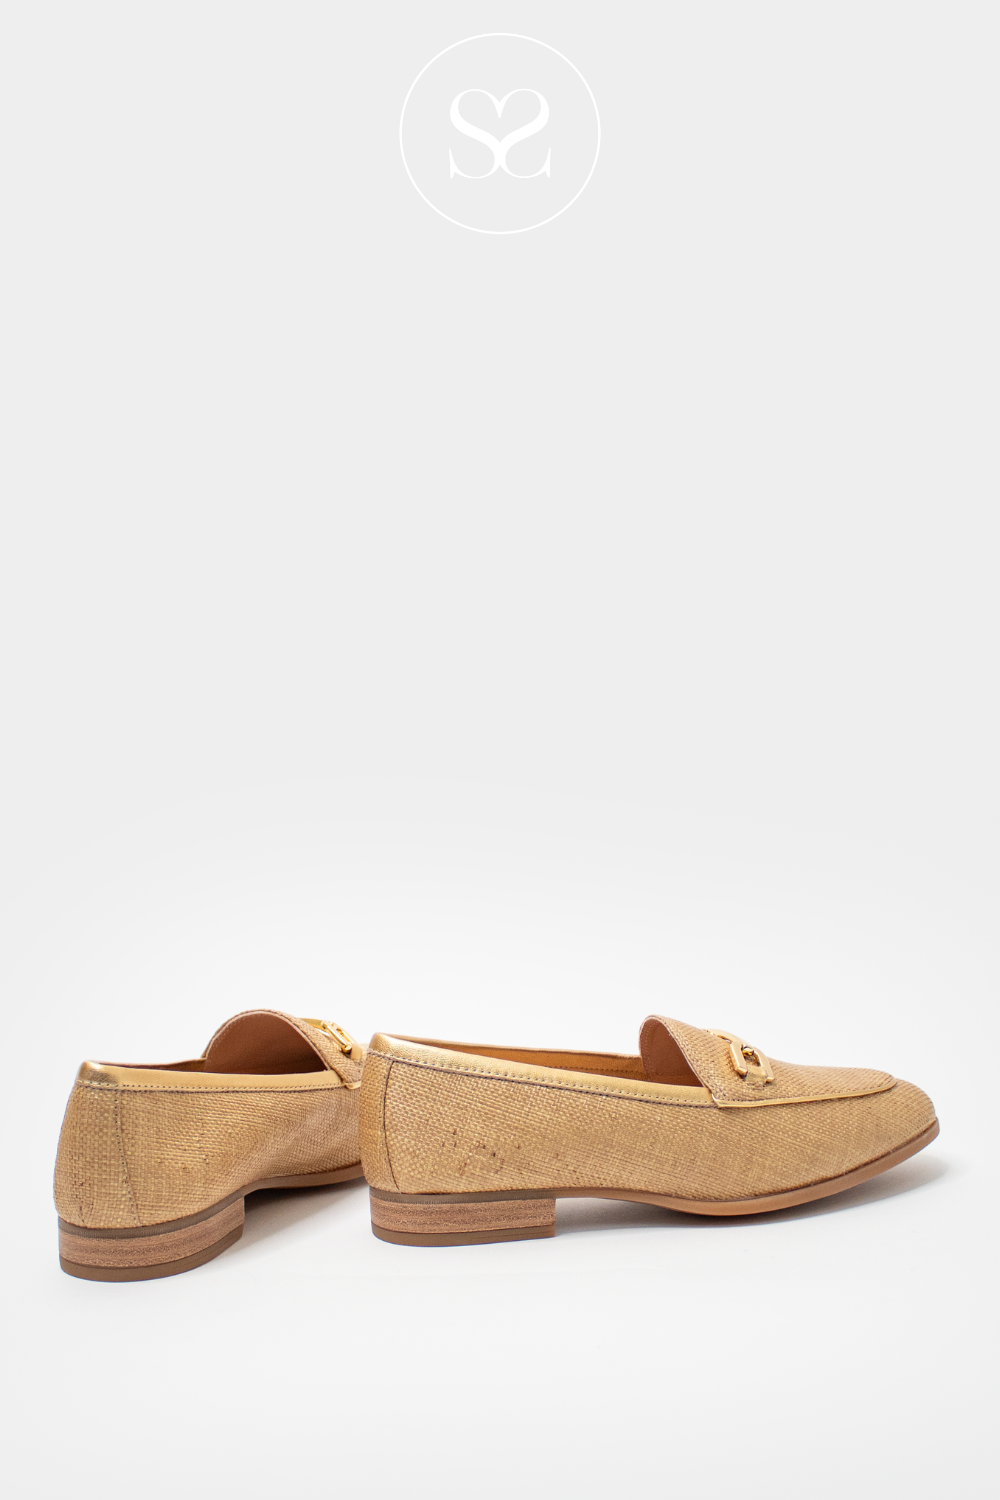 UNISA DALCY NEUTRAL TEXTURED LEATHER FLAT LOAFERS